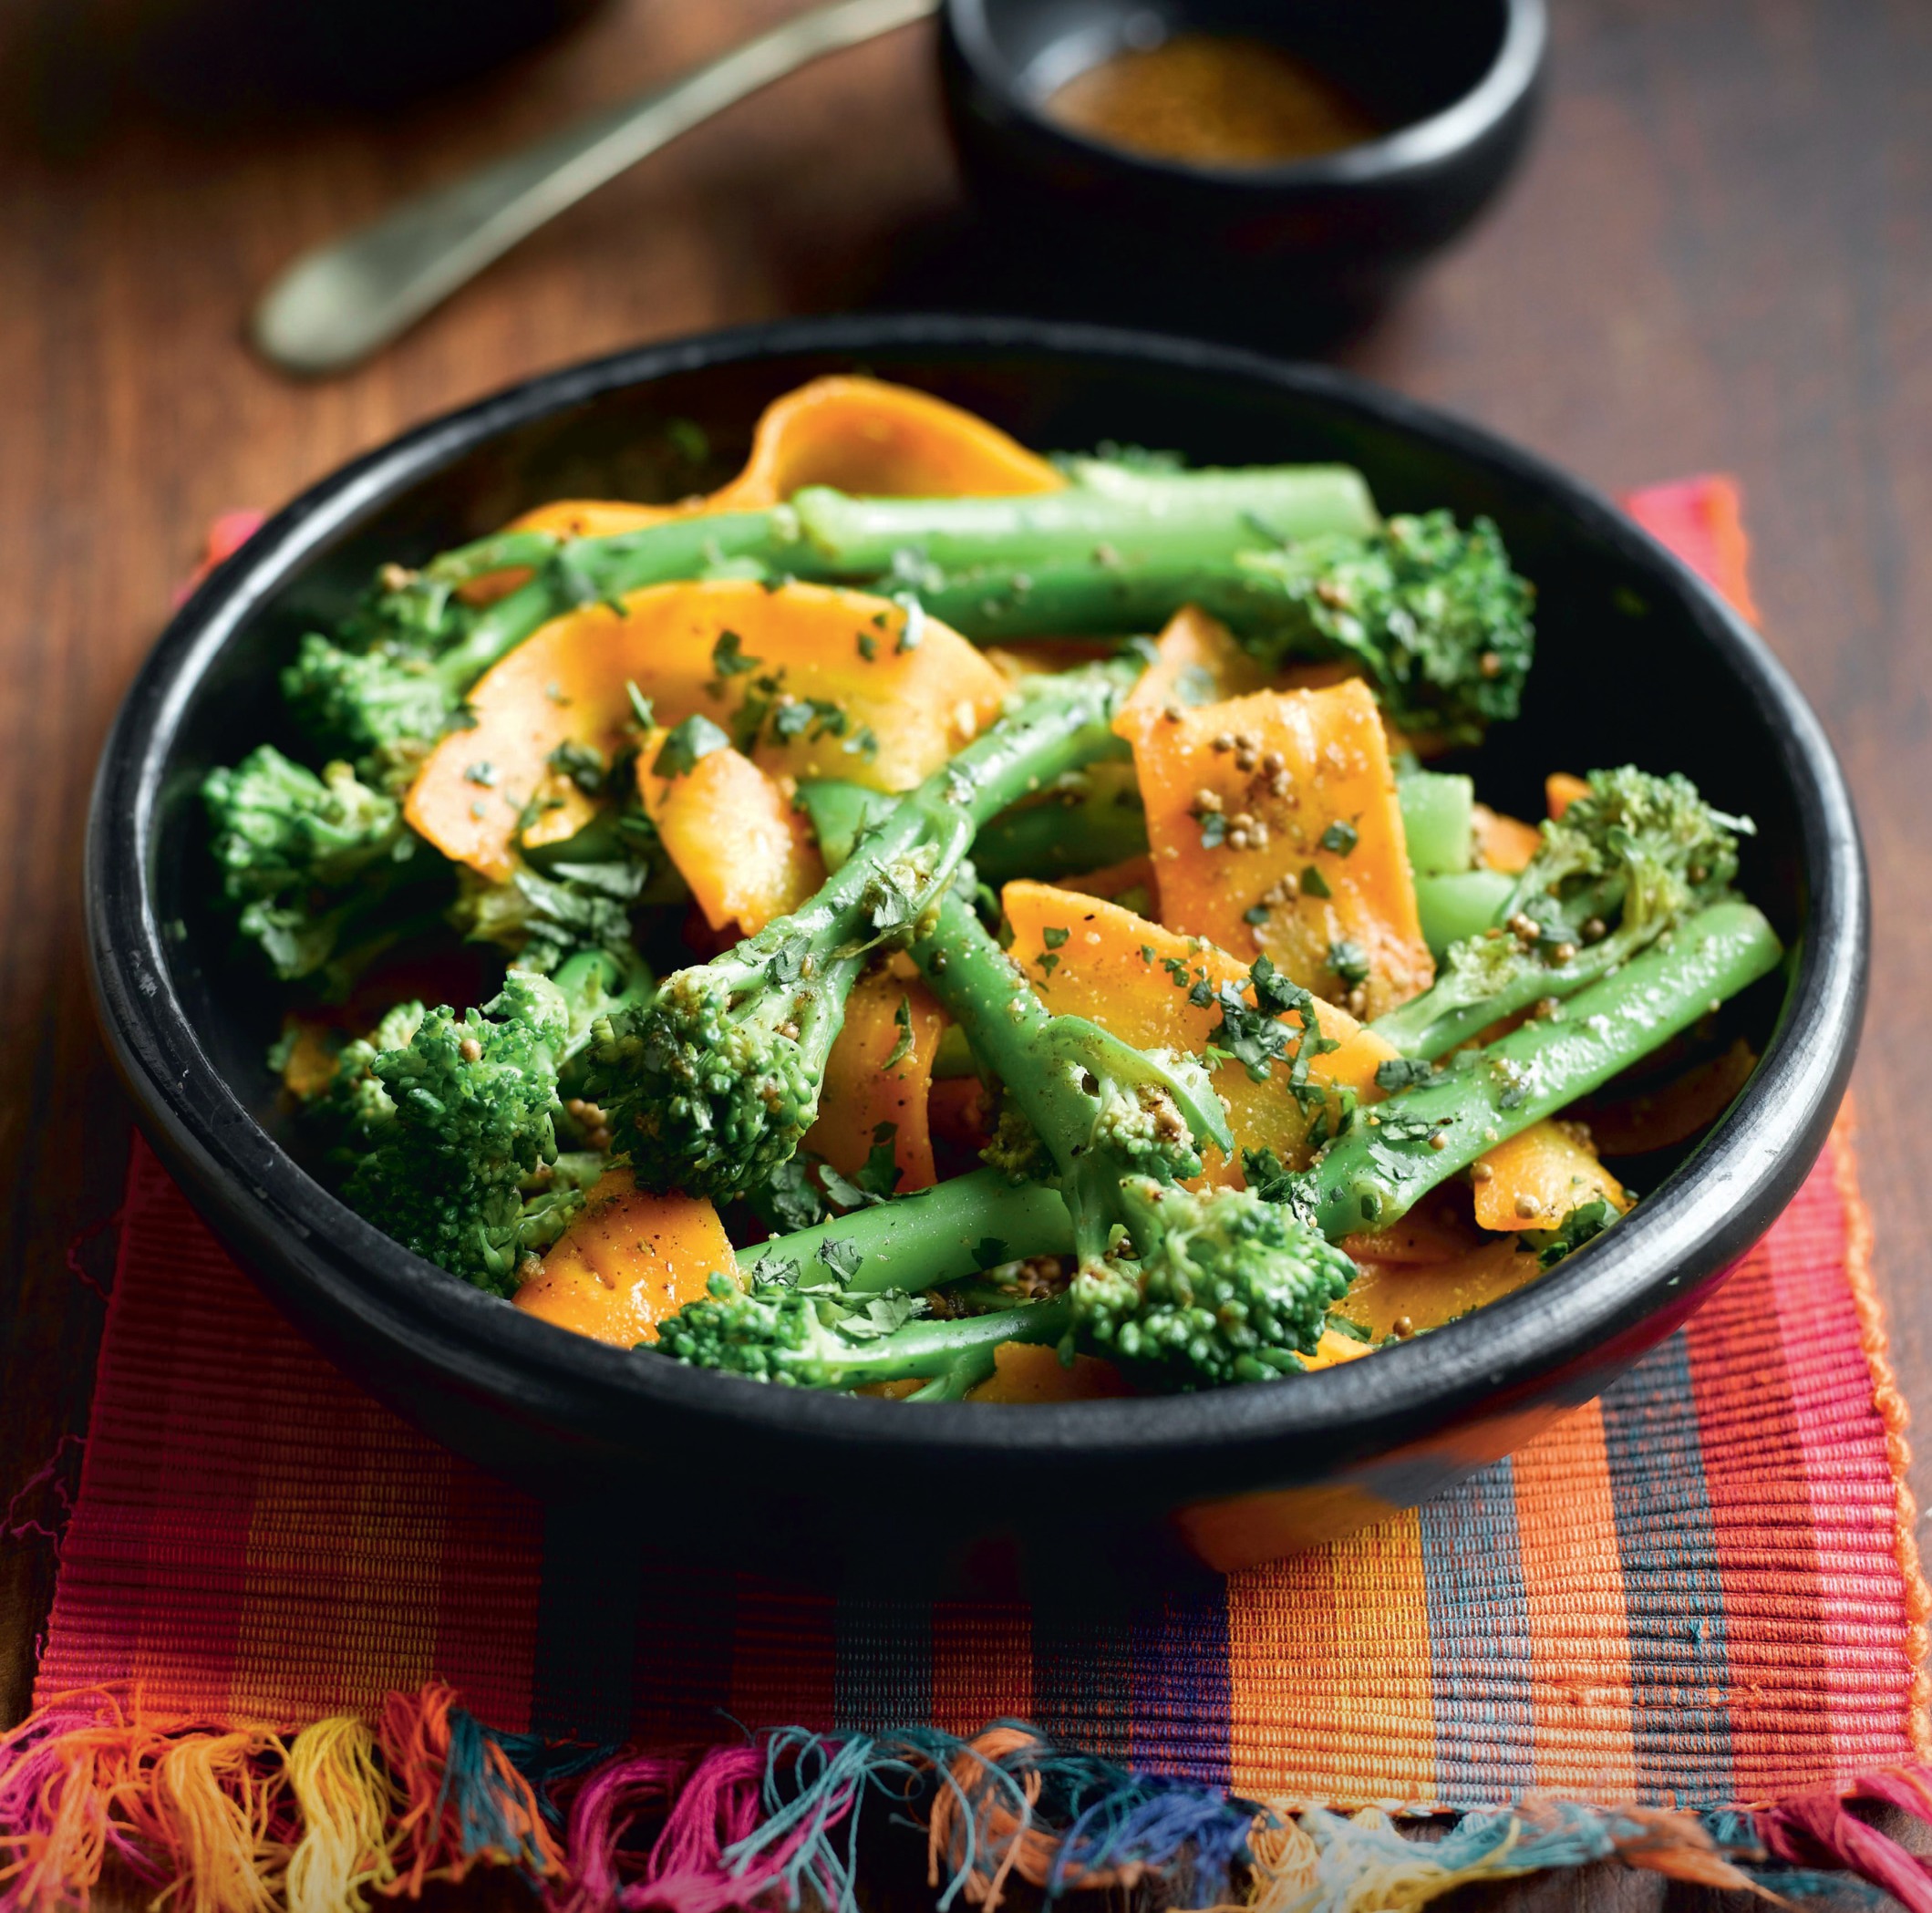 Indian-spiced Warm Broccoli and Carrot Salad Vegetarian Recipe